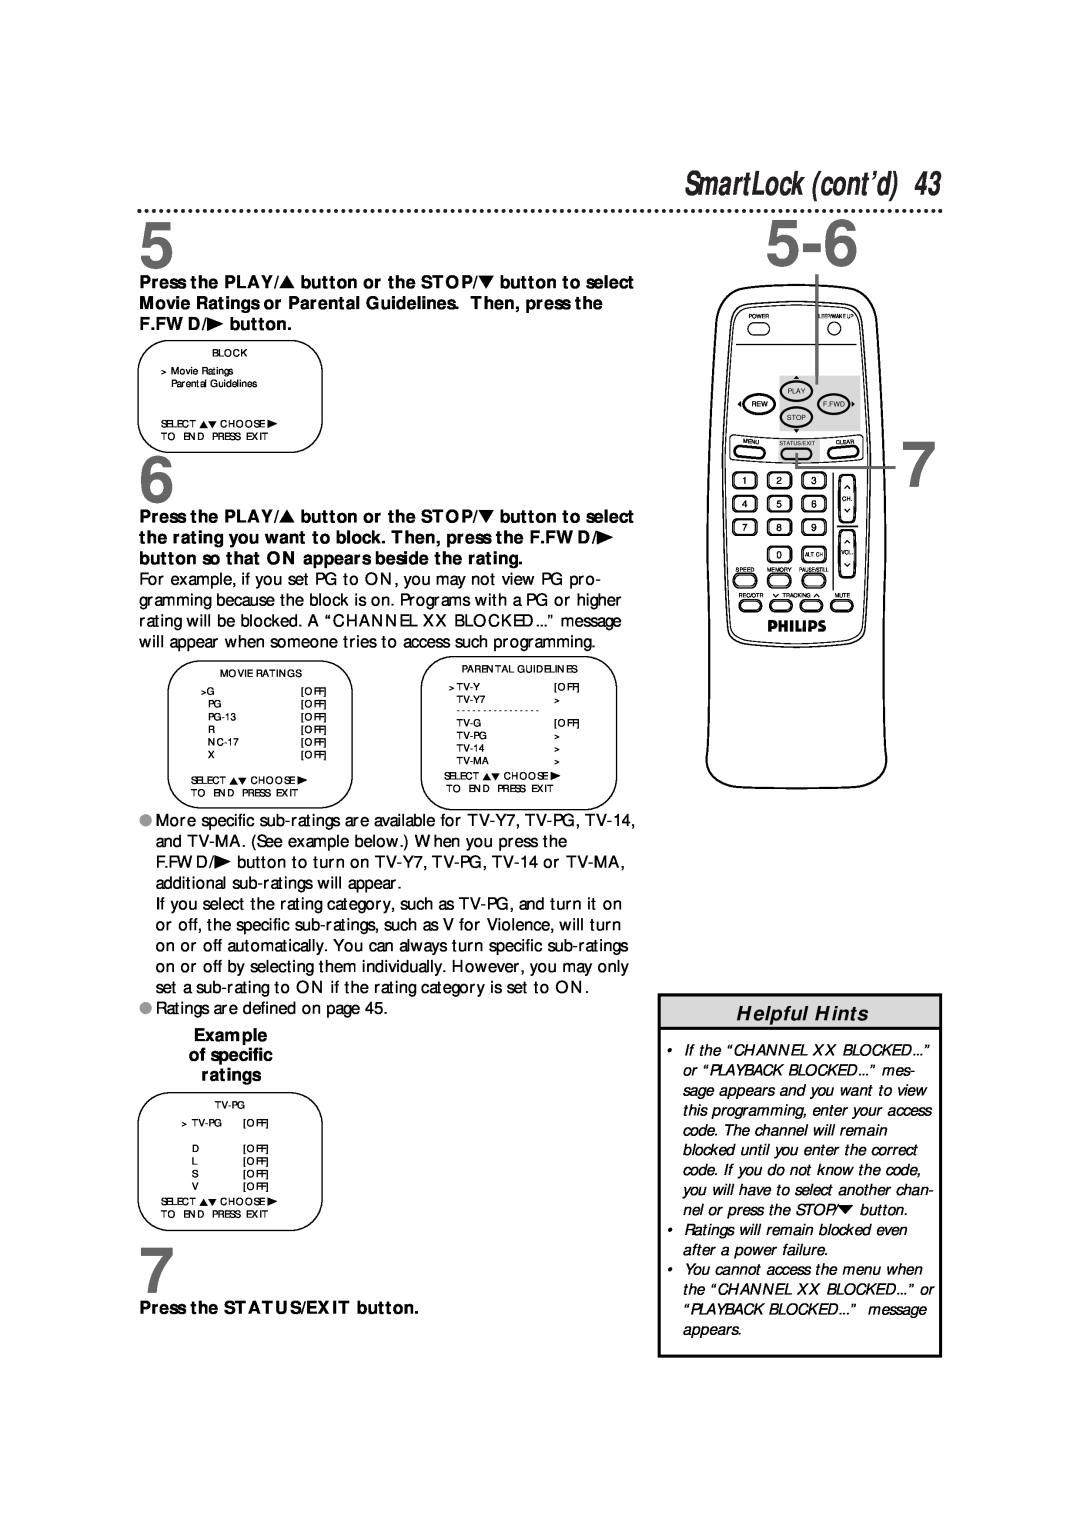 Philips CCB 192AT, CCB 132AT, CCB190AT owner manual SmartLock cont’d, Helpful Hints, Ratings are defined on page, appears 